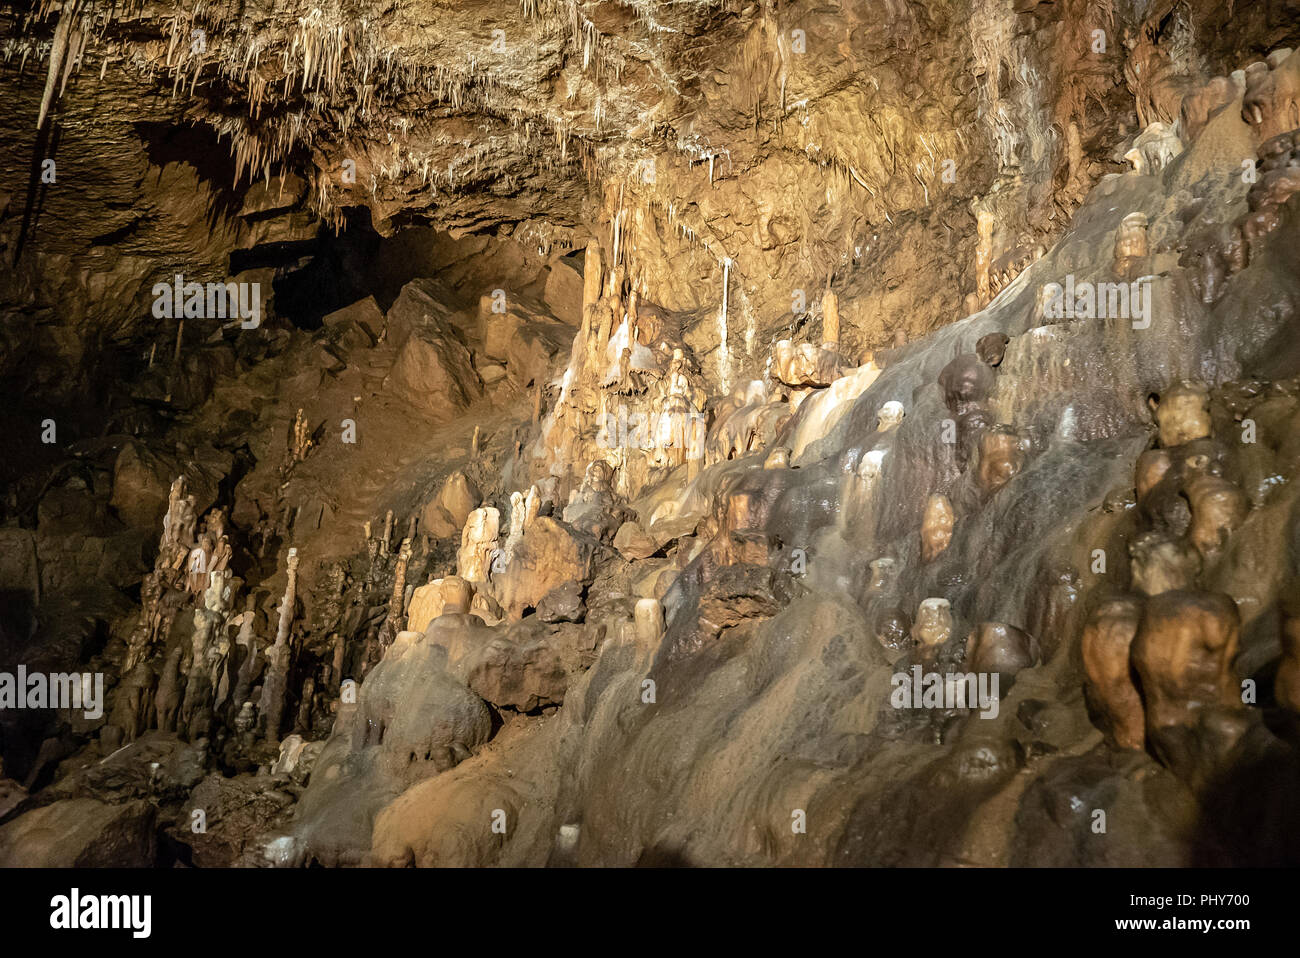 Limestone formations inside a cave Stock Photo